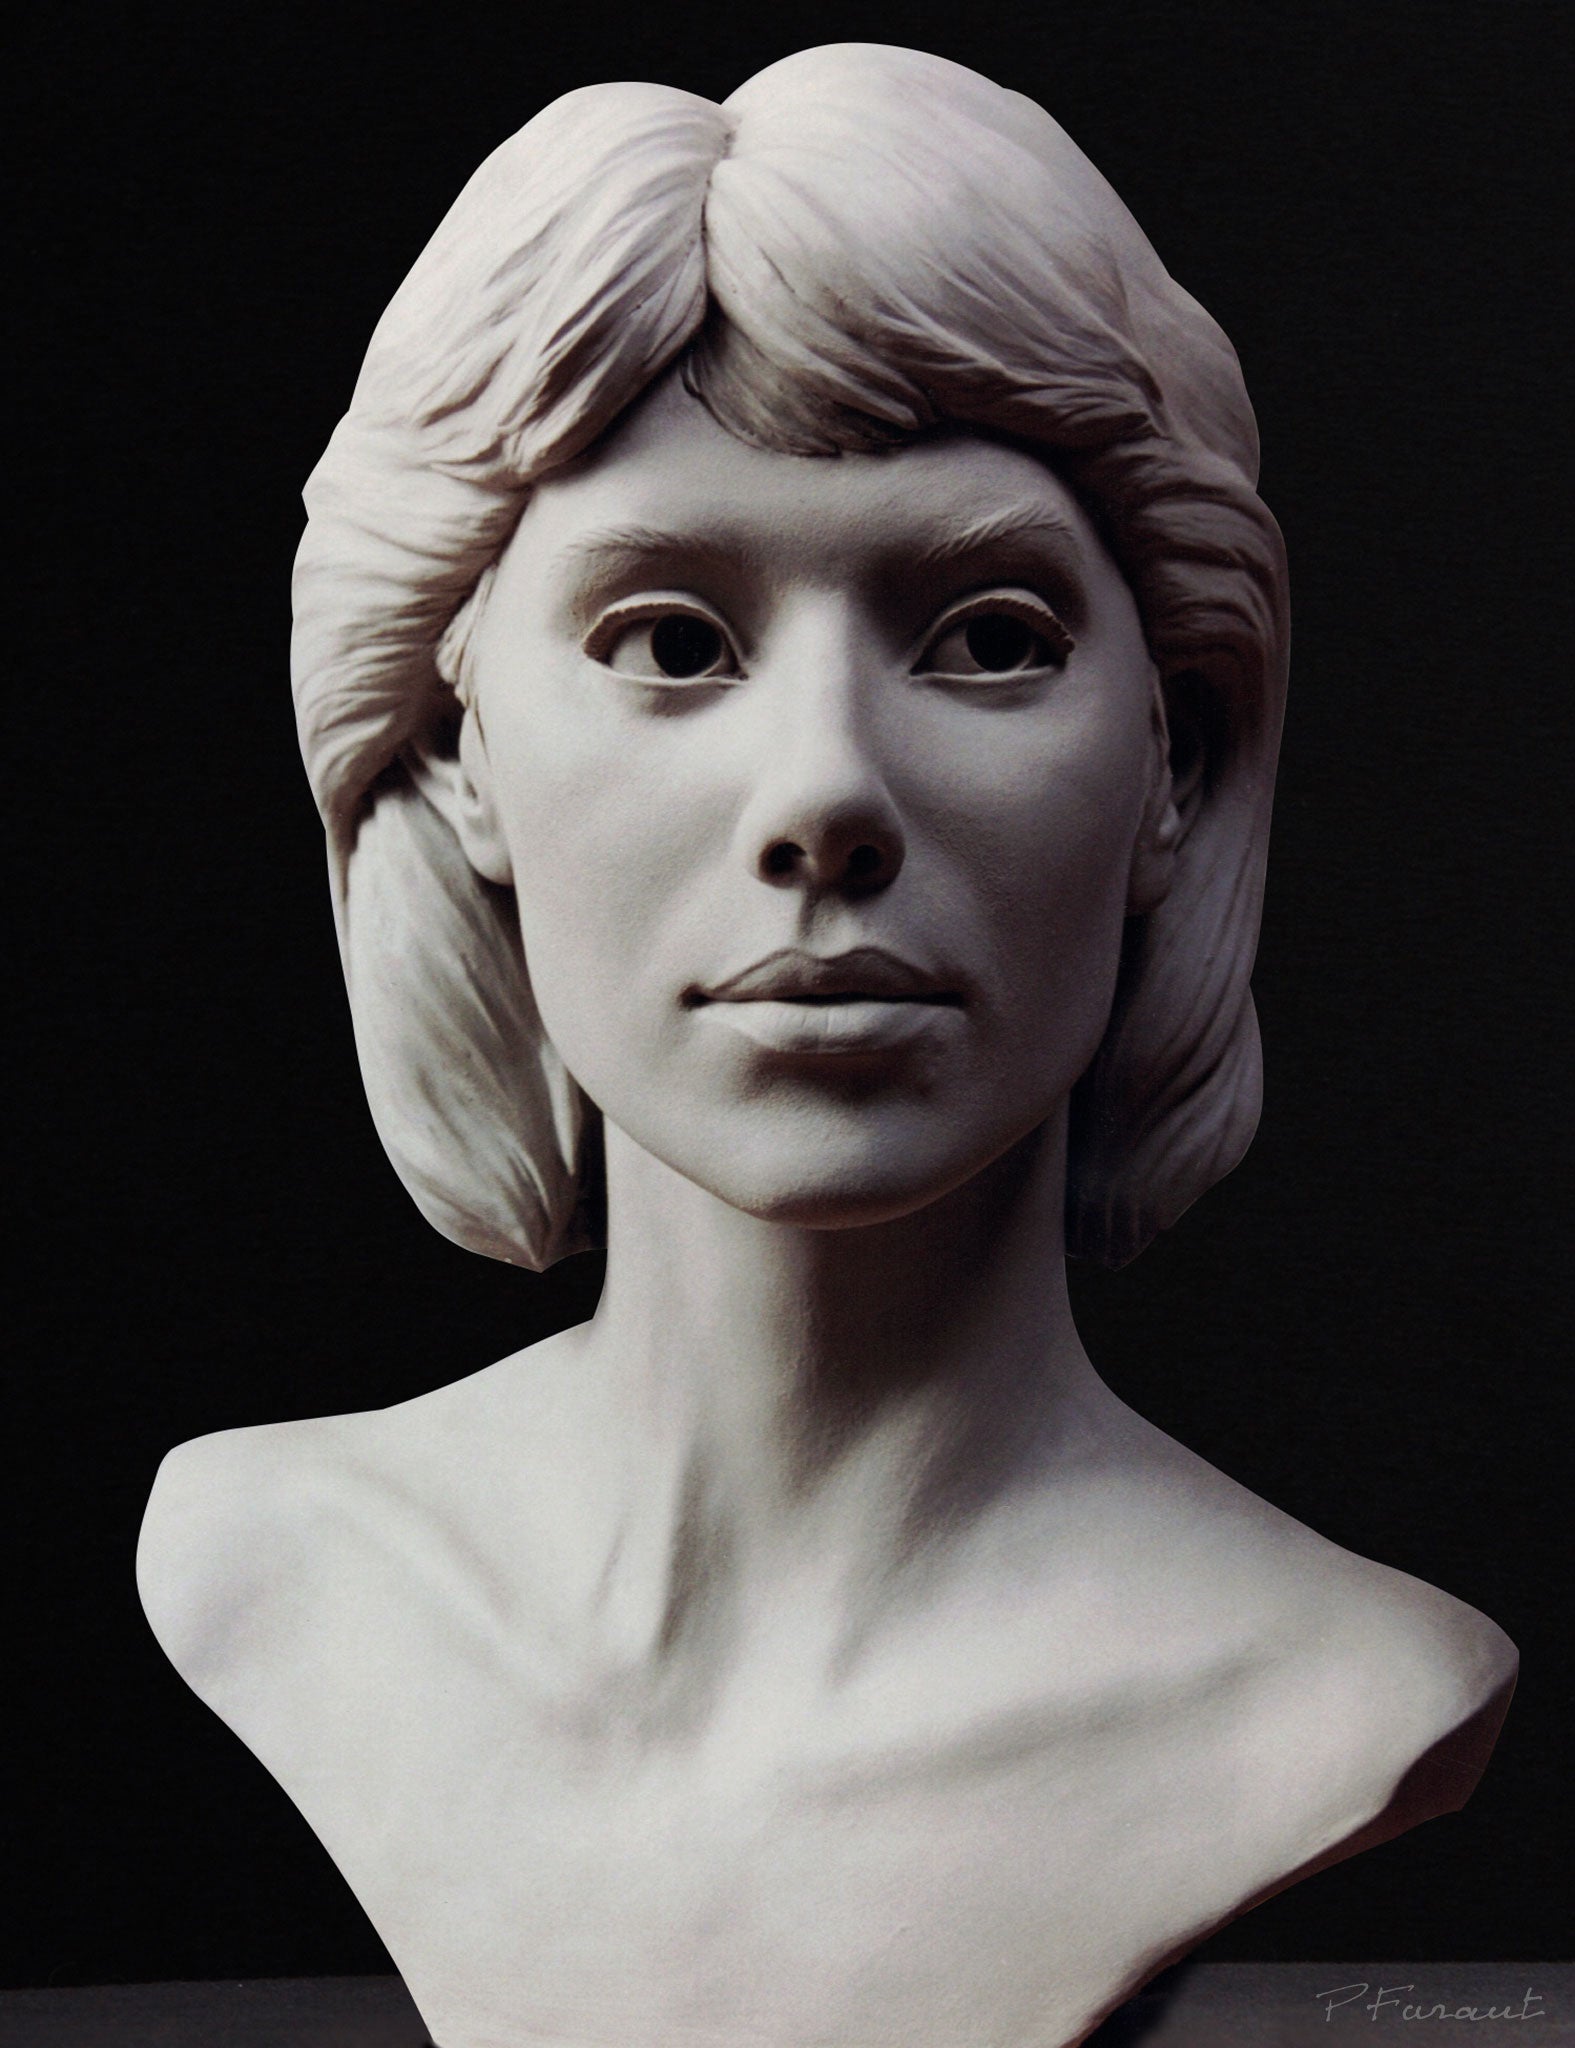 Clay portrait of the artist's wife Charisse by Philippe Faraut